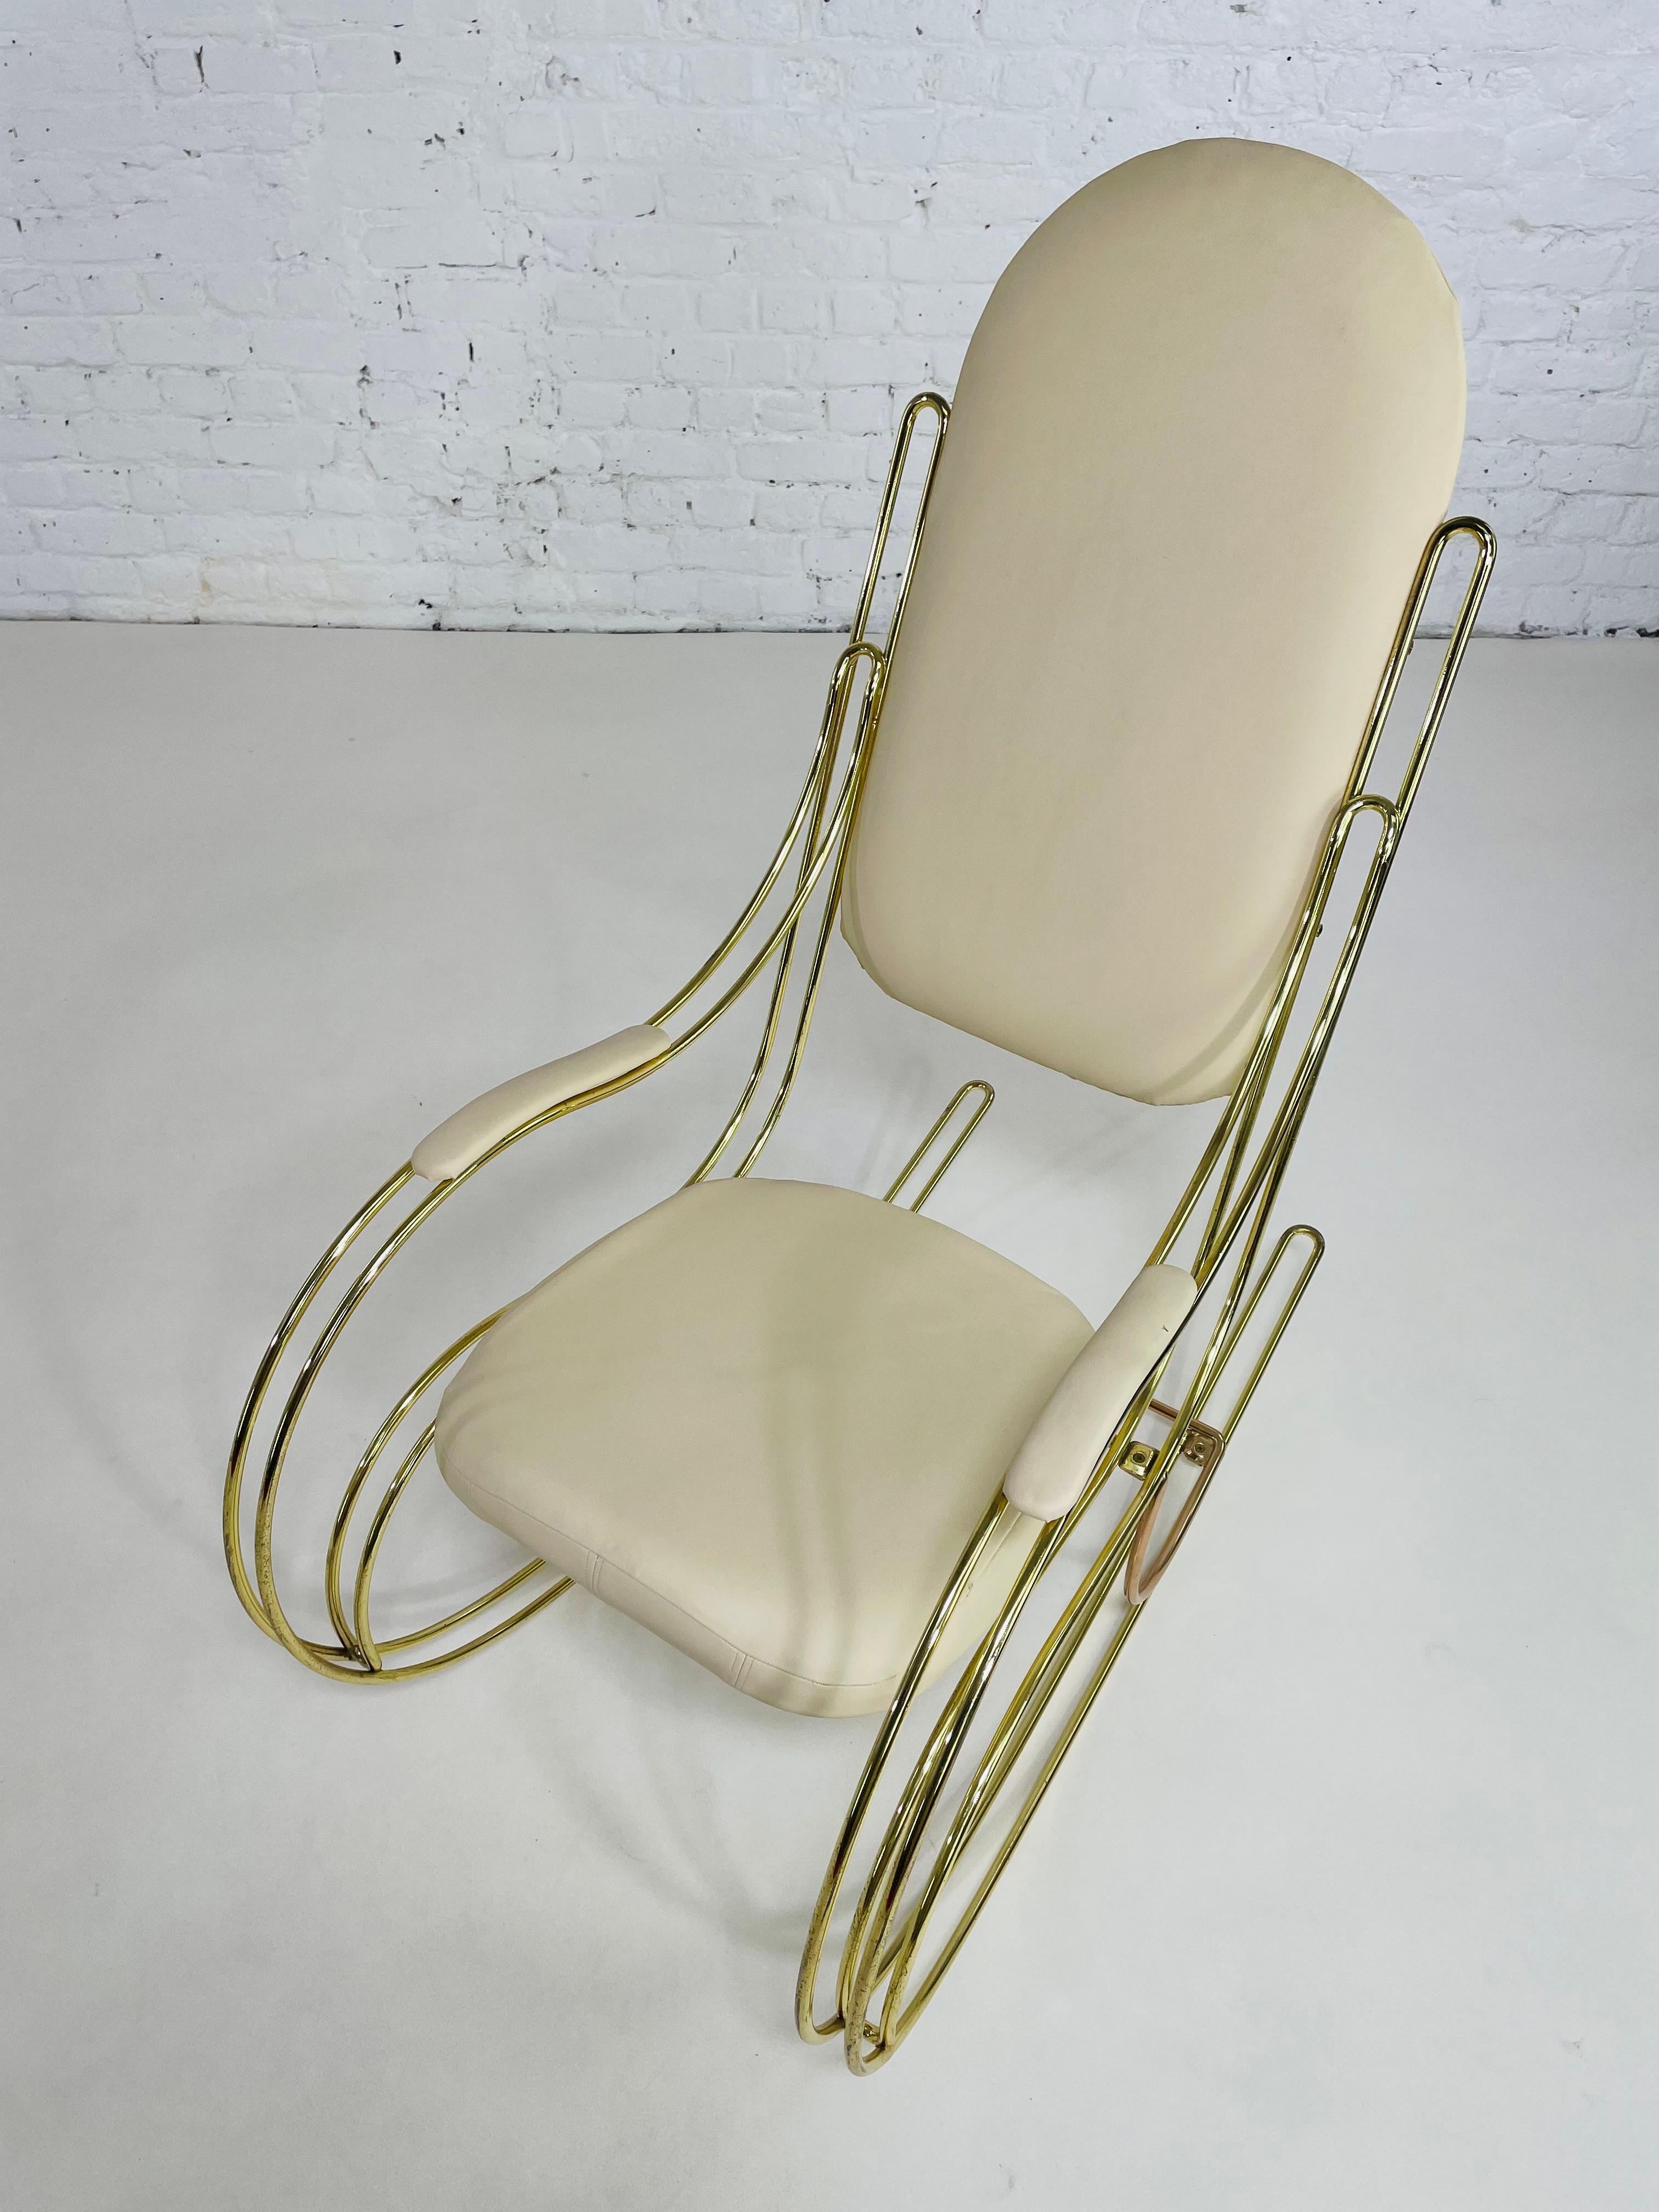 1960s-1970s Brass And Beige Faux Leather Rocking Chair For Sale 14